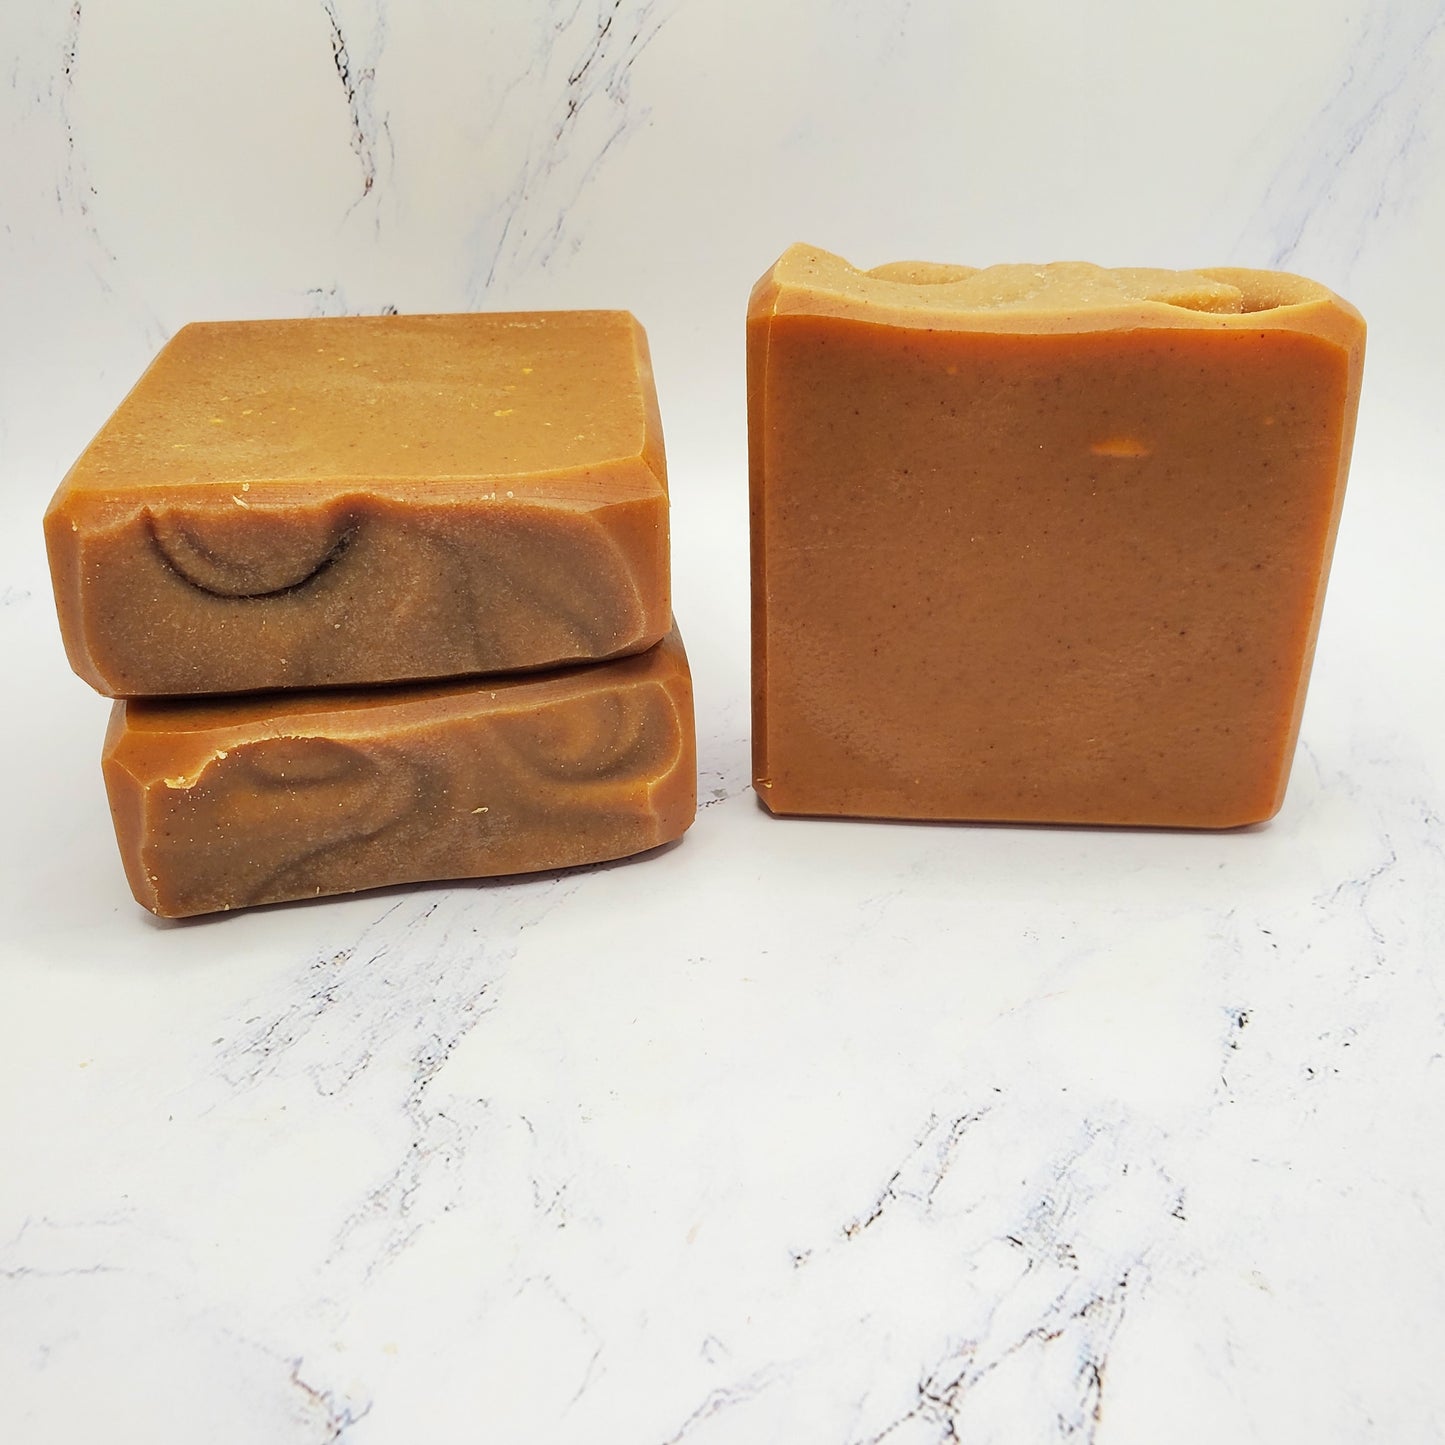 Turmeric & Honey with Frankincense and Cedarwood Essential Oils